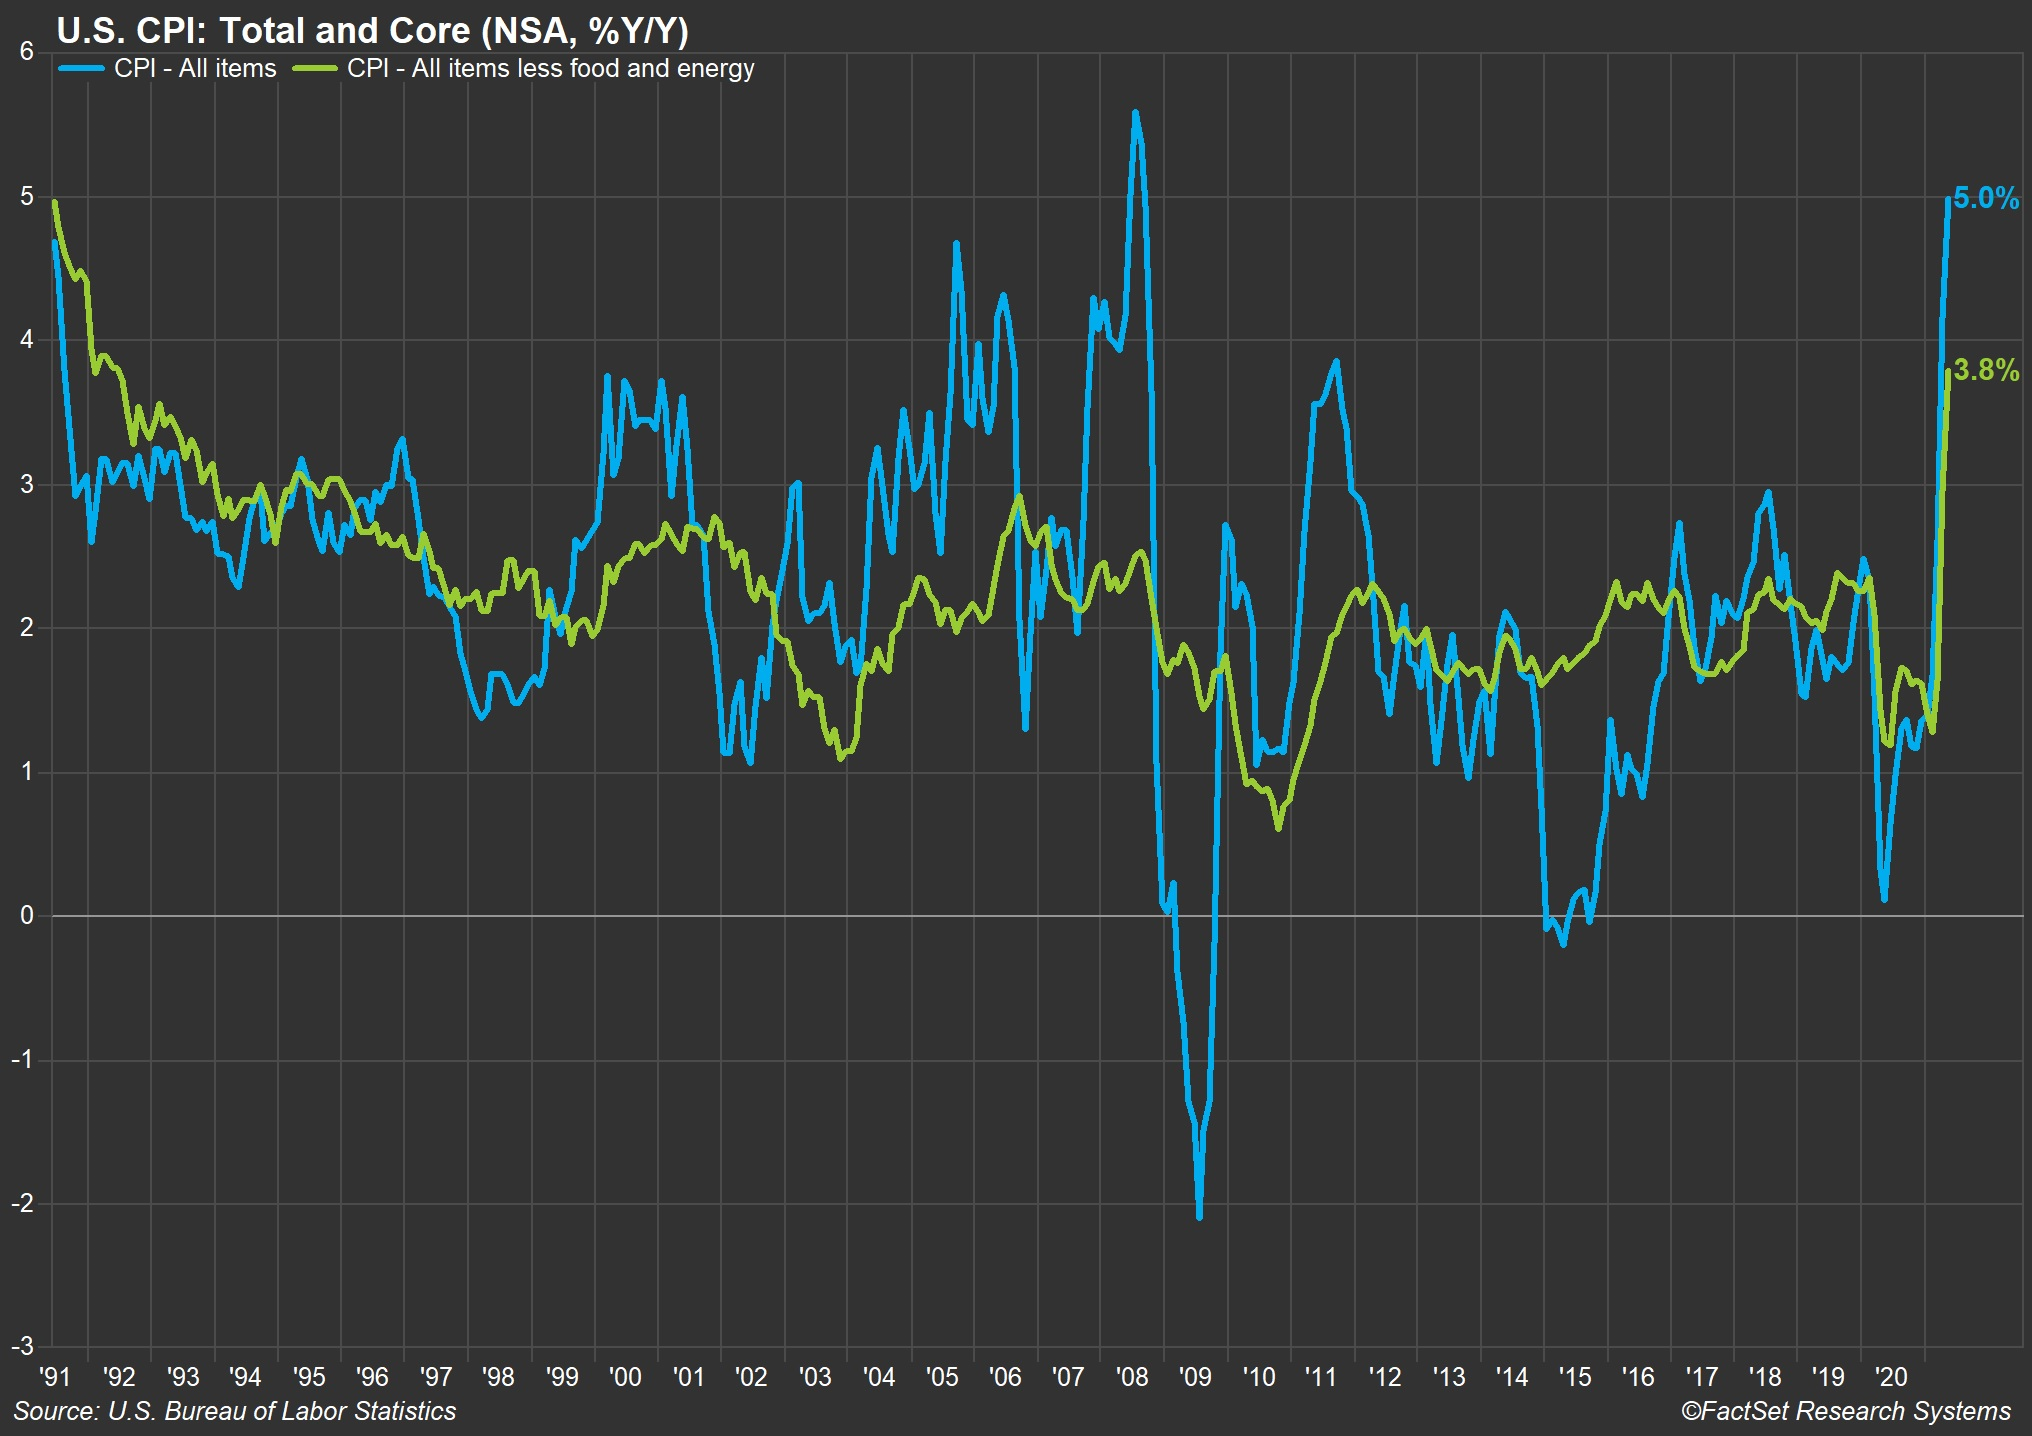 May 2021 Total and Core CPI